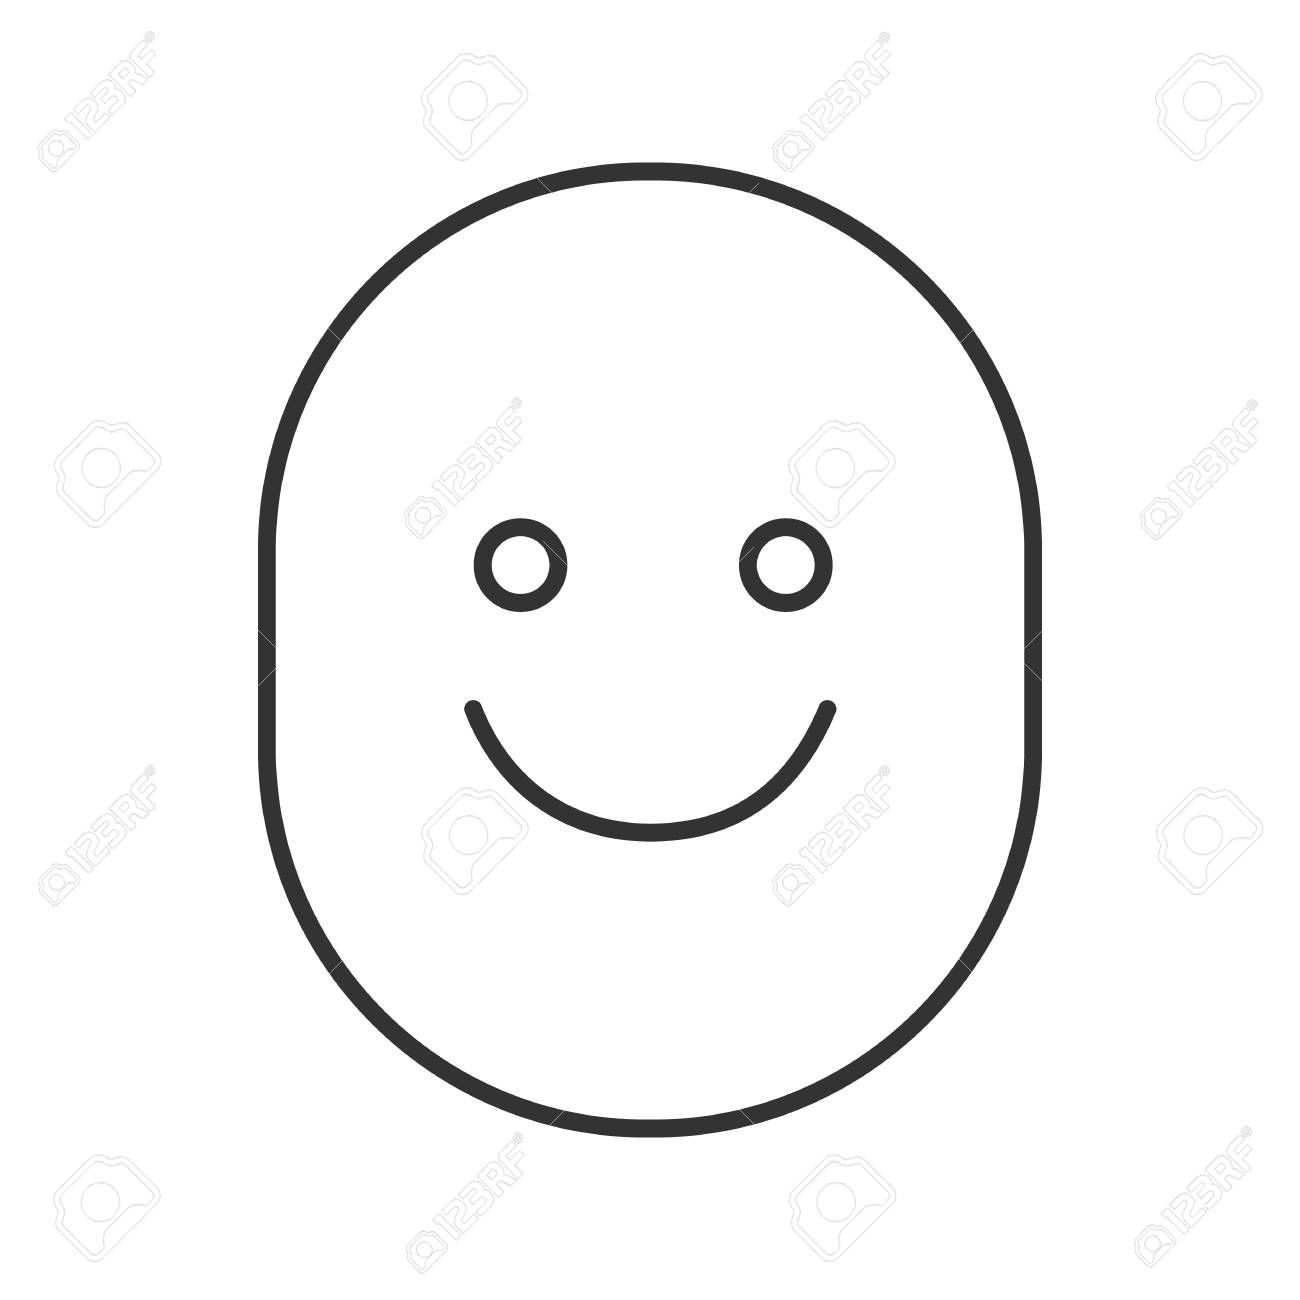 93837574-happy-and-funny-smile-linear-icon-thin-line-illustration-contour-symbol-vector-isolated-outline-draw.jpg